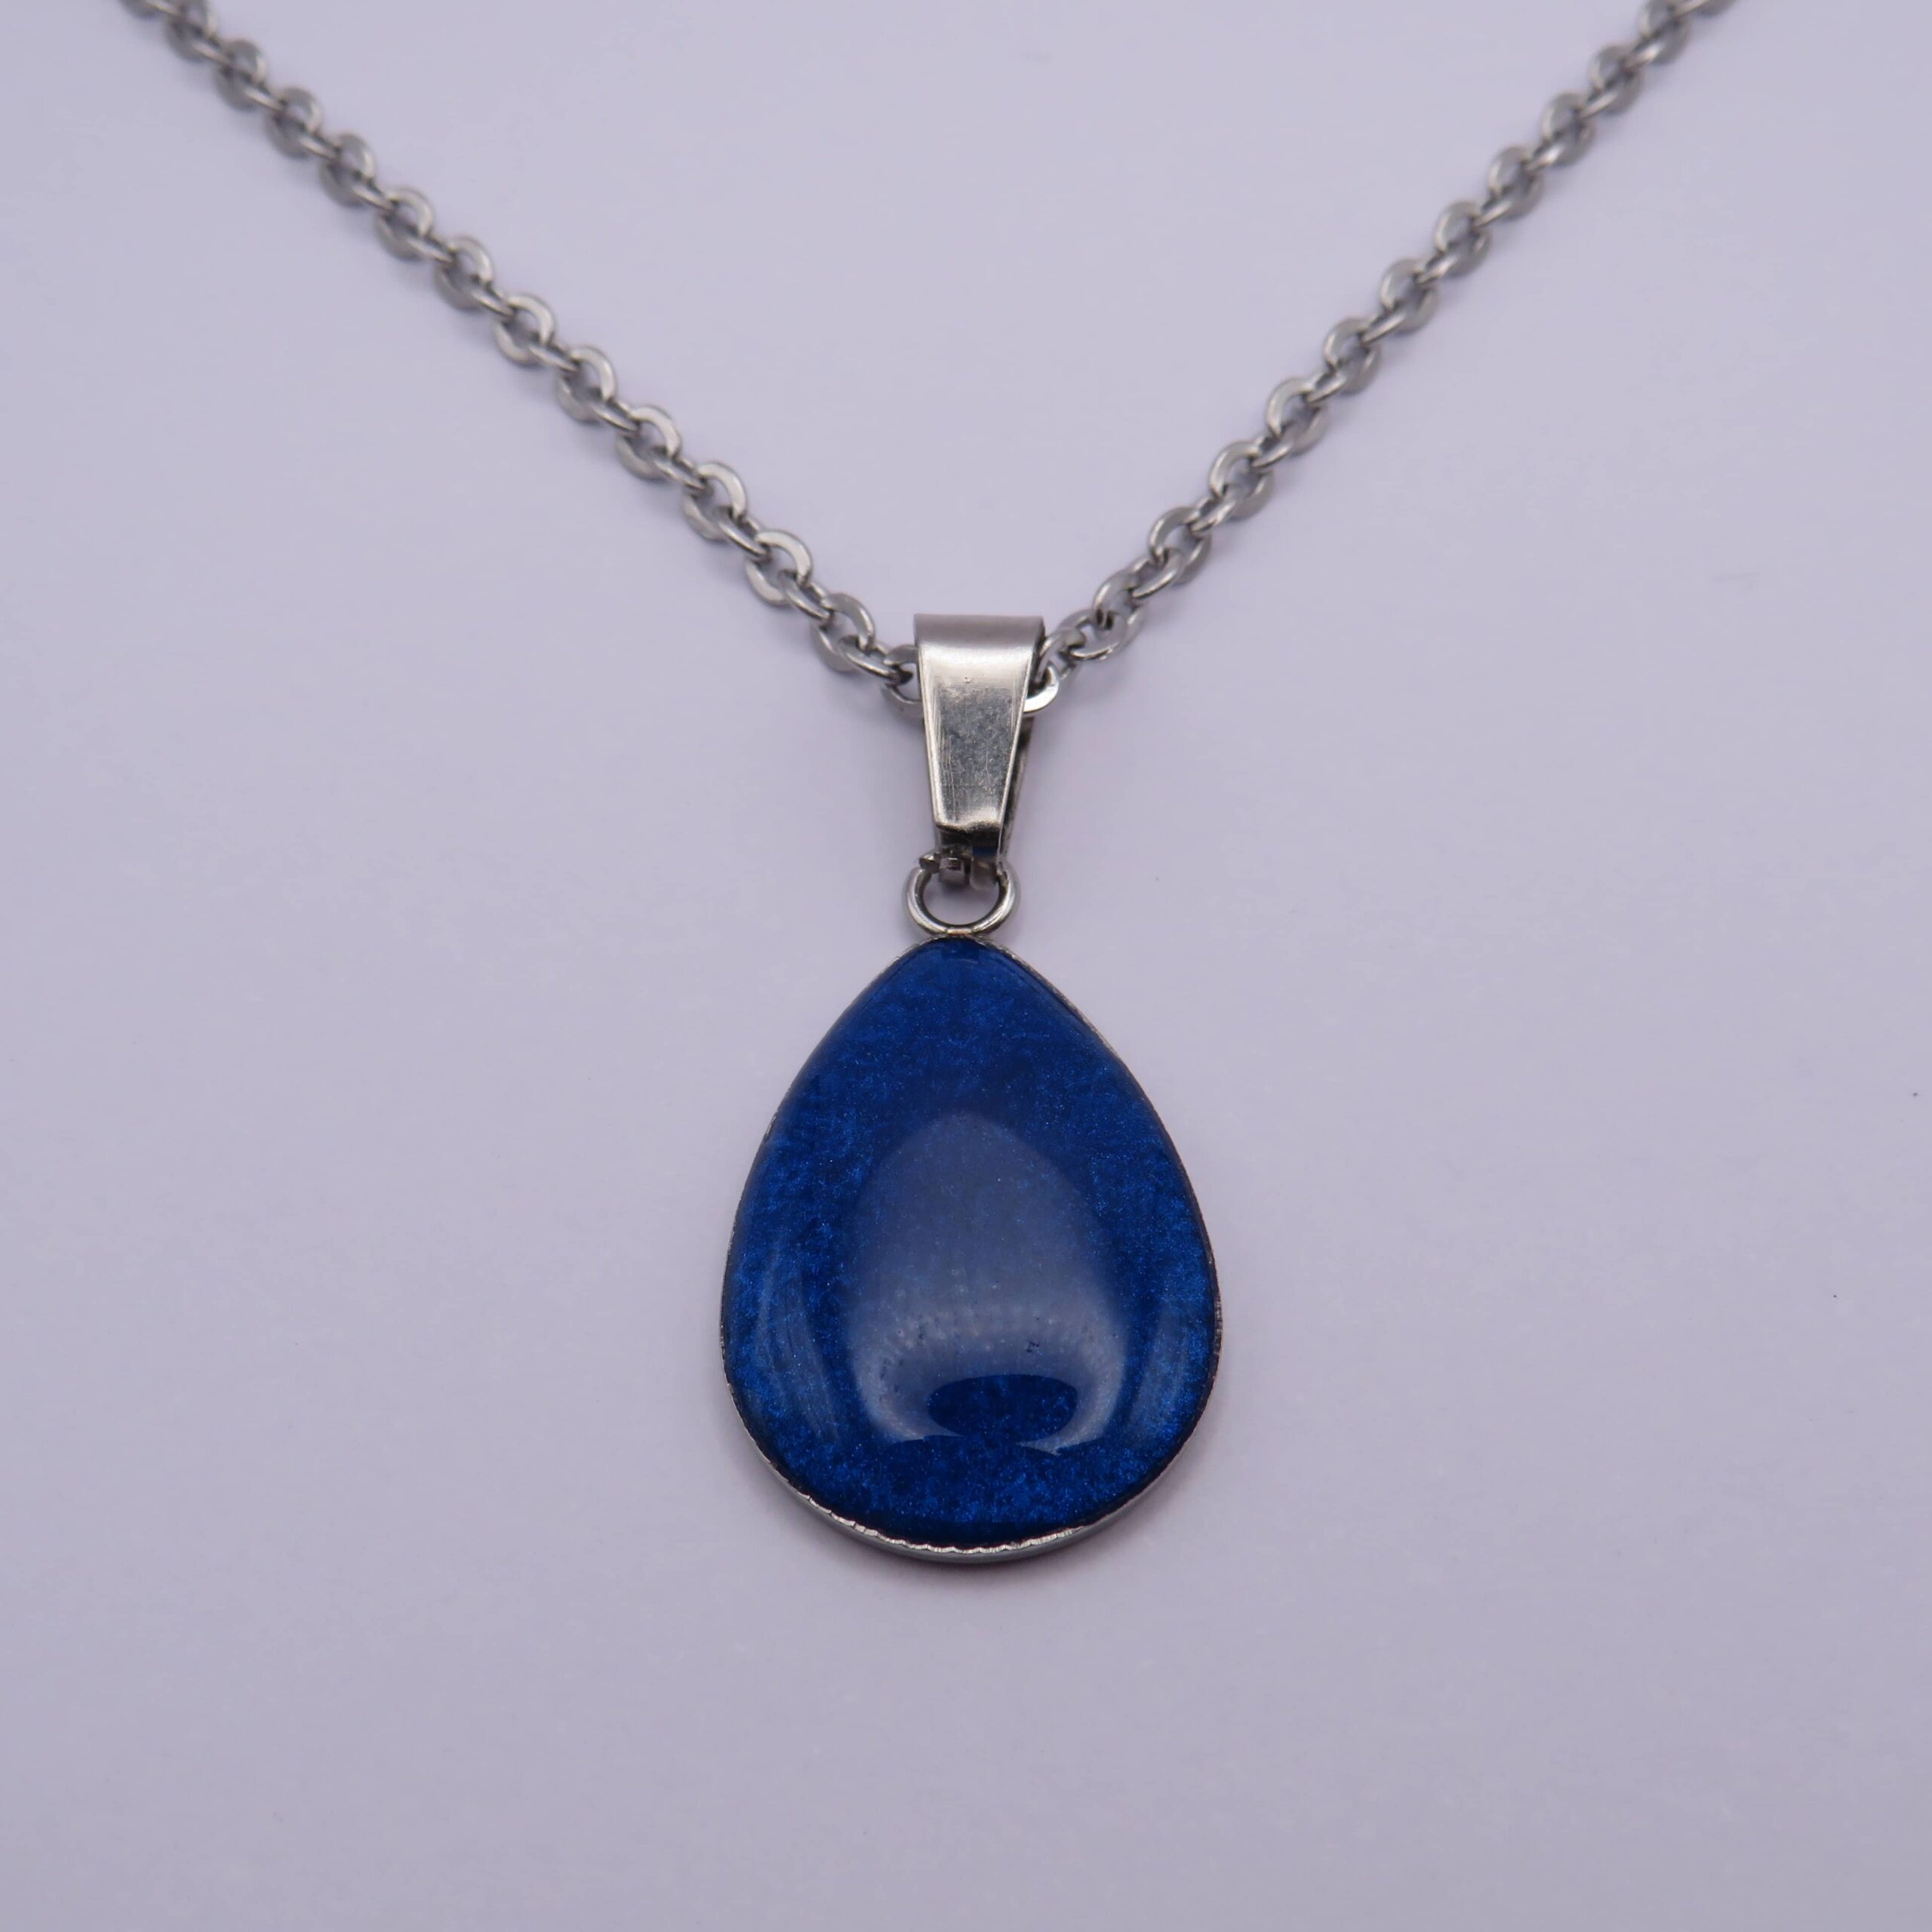 Stainless Steel Blue Resin Cabochon Pendant Necklace